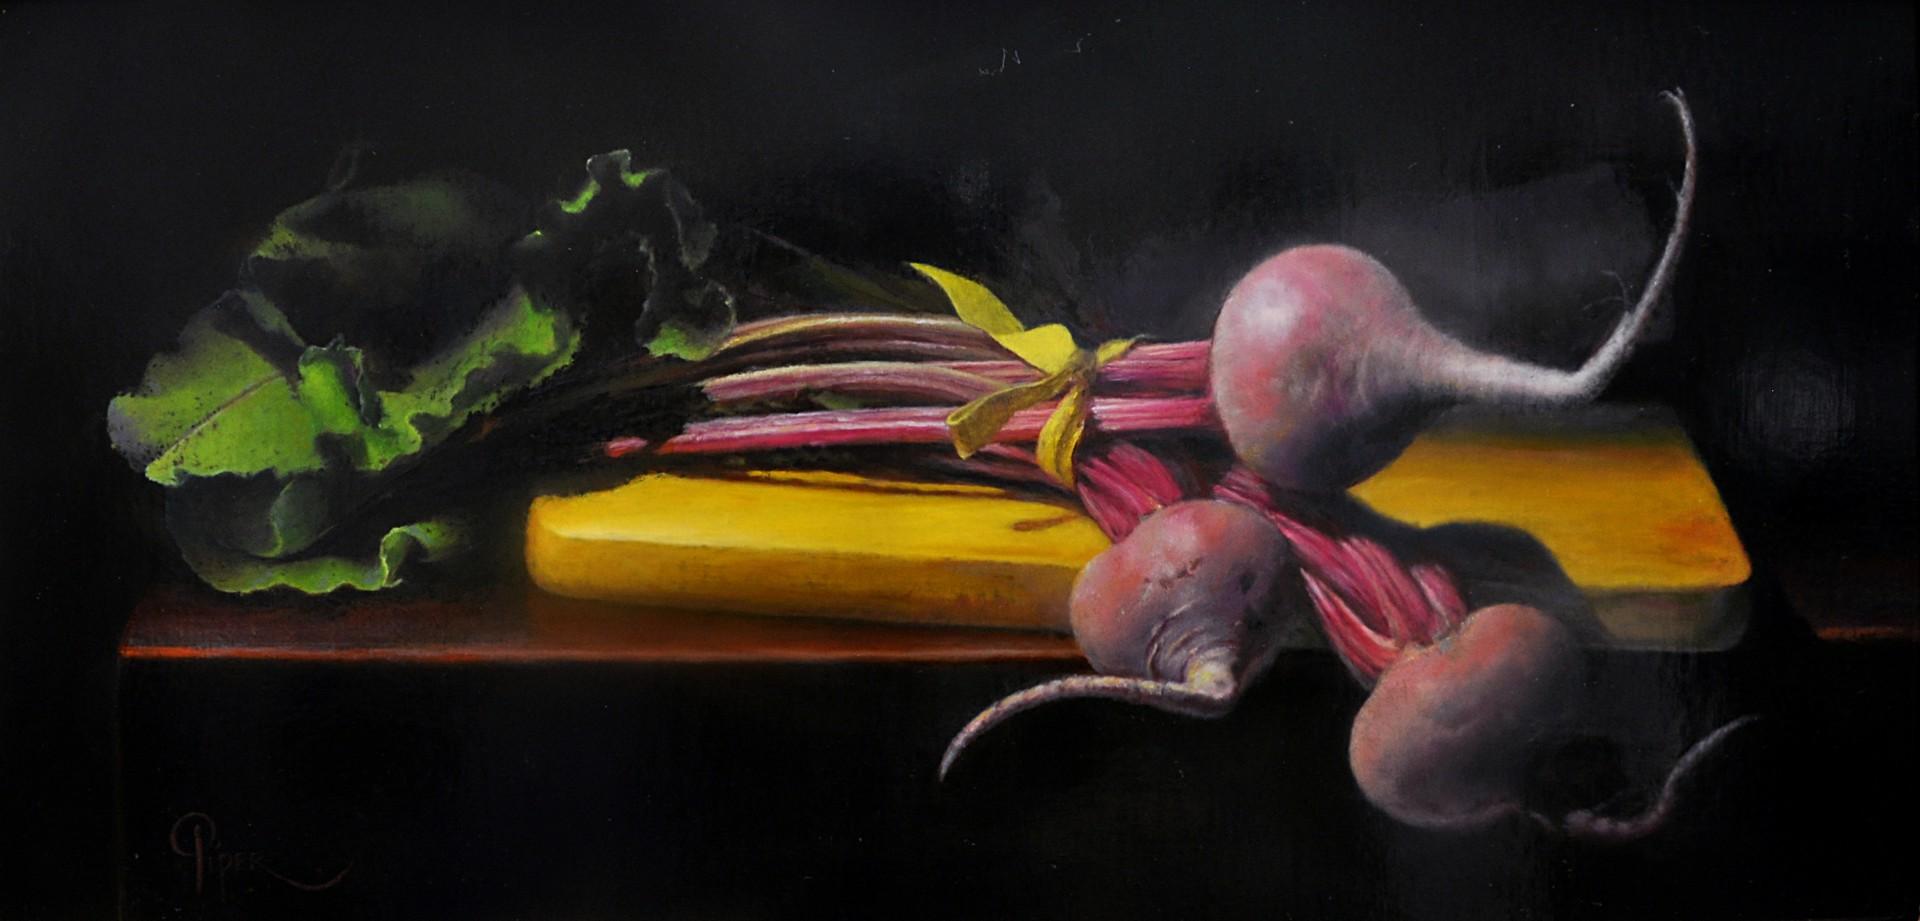 Beets - Locally Grown - Art by Marsha Whitesides Piper